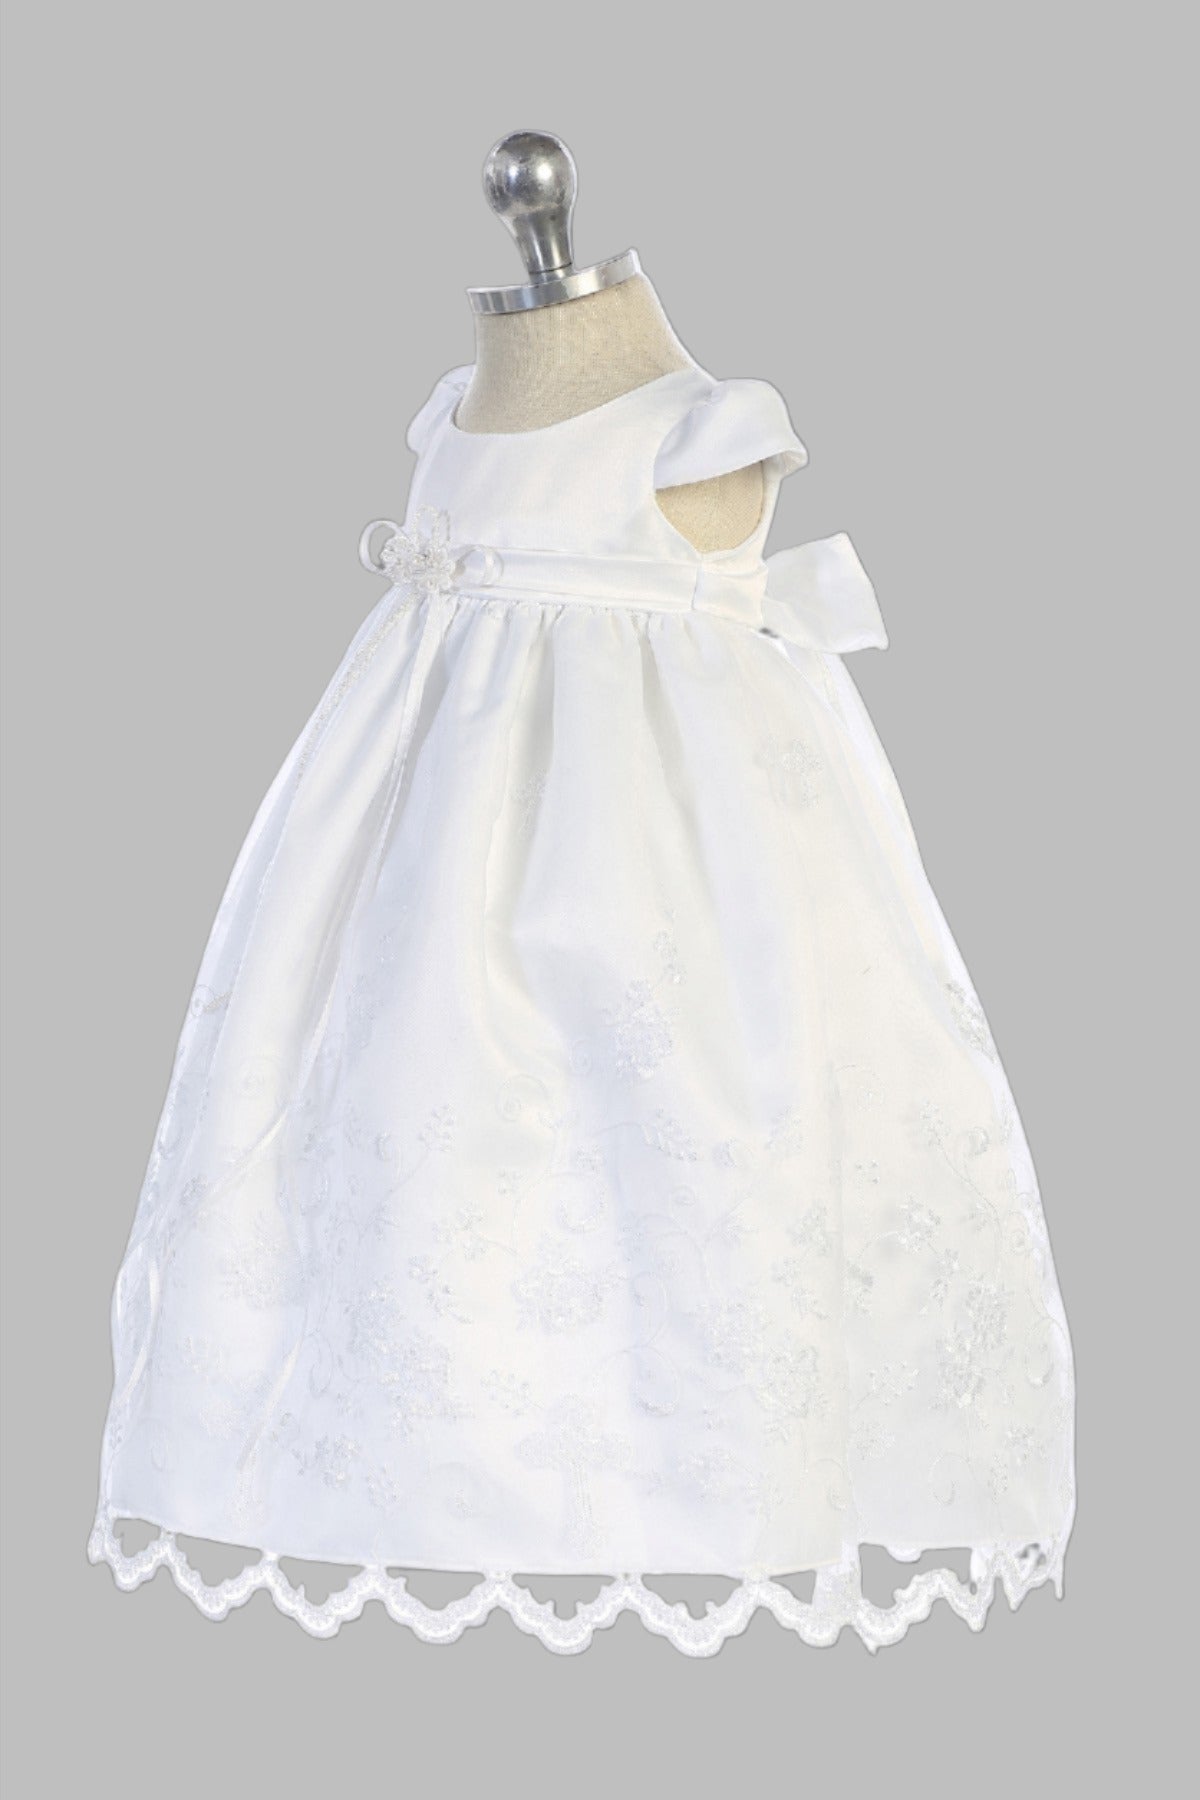 Affordable Christening Gown With Cross Embroidered Hem with a white bonnet for with cross Christening or Baptizing a baby girl